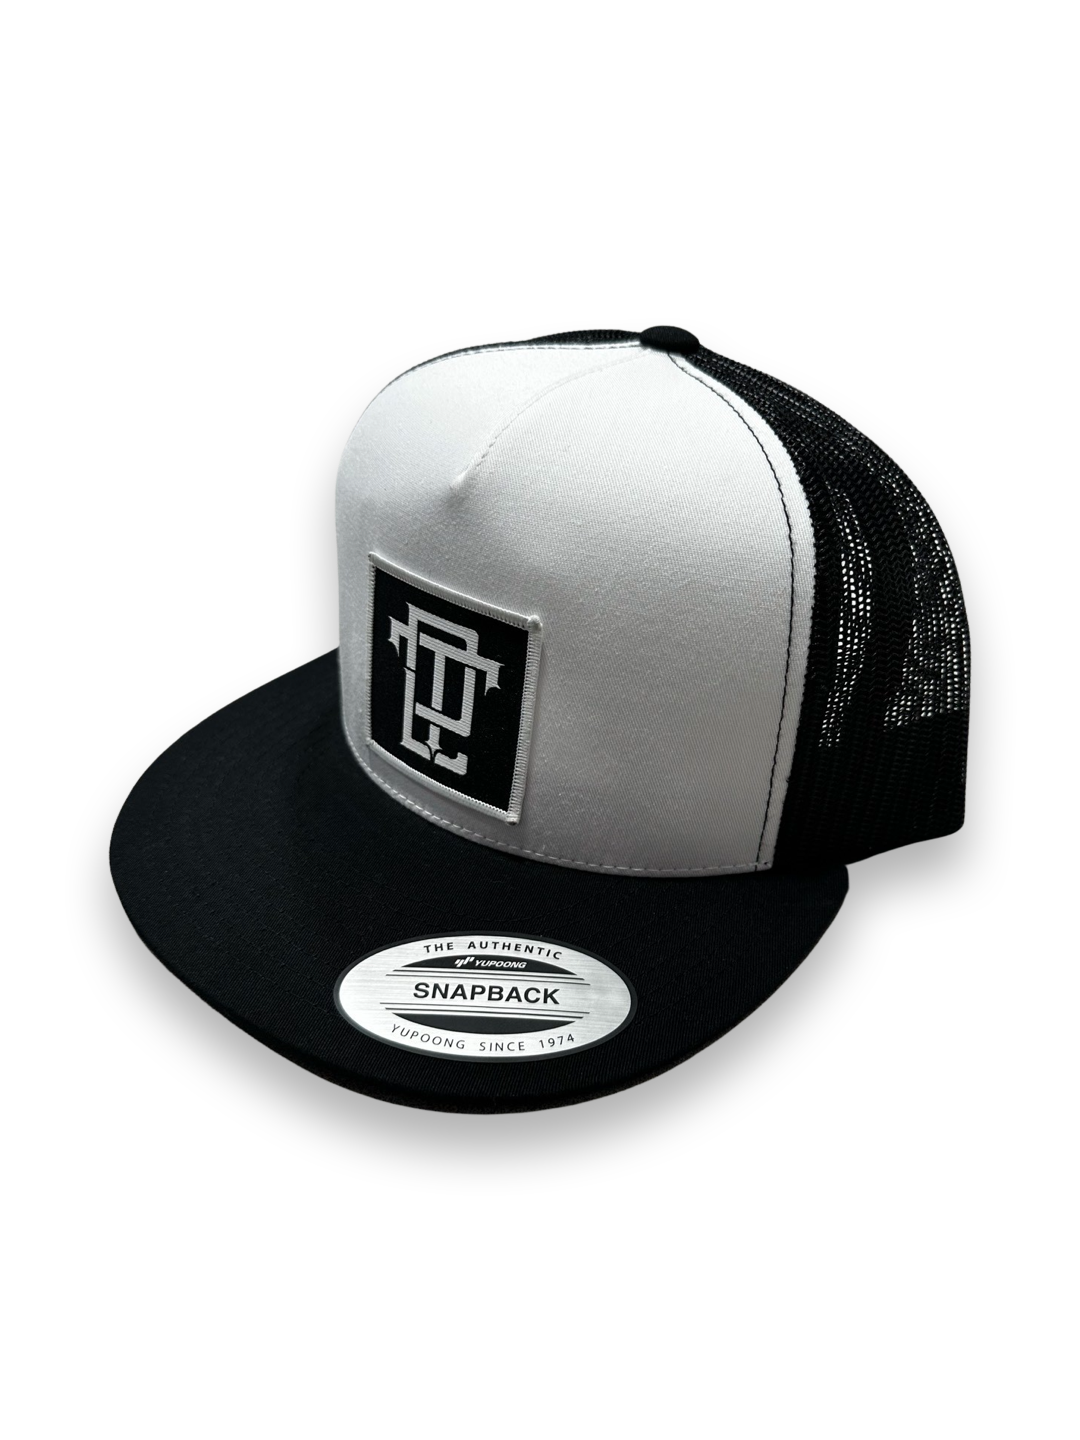 The Alias Patch Flat Bill- Black and White Hat - Dude That Lifts